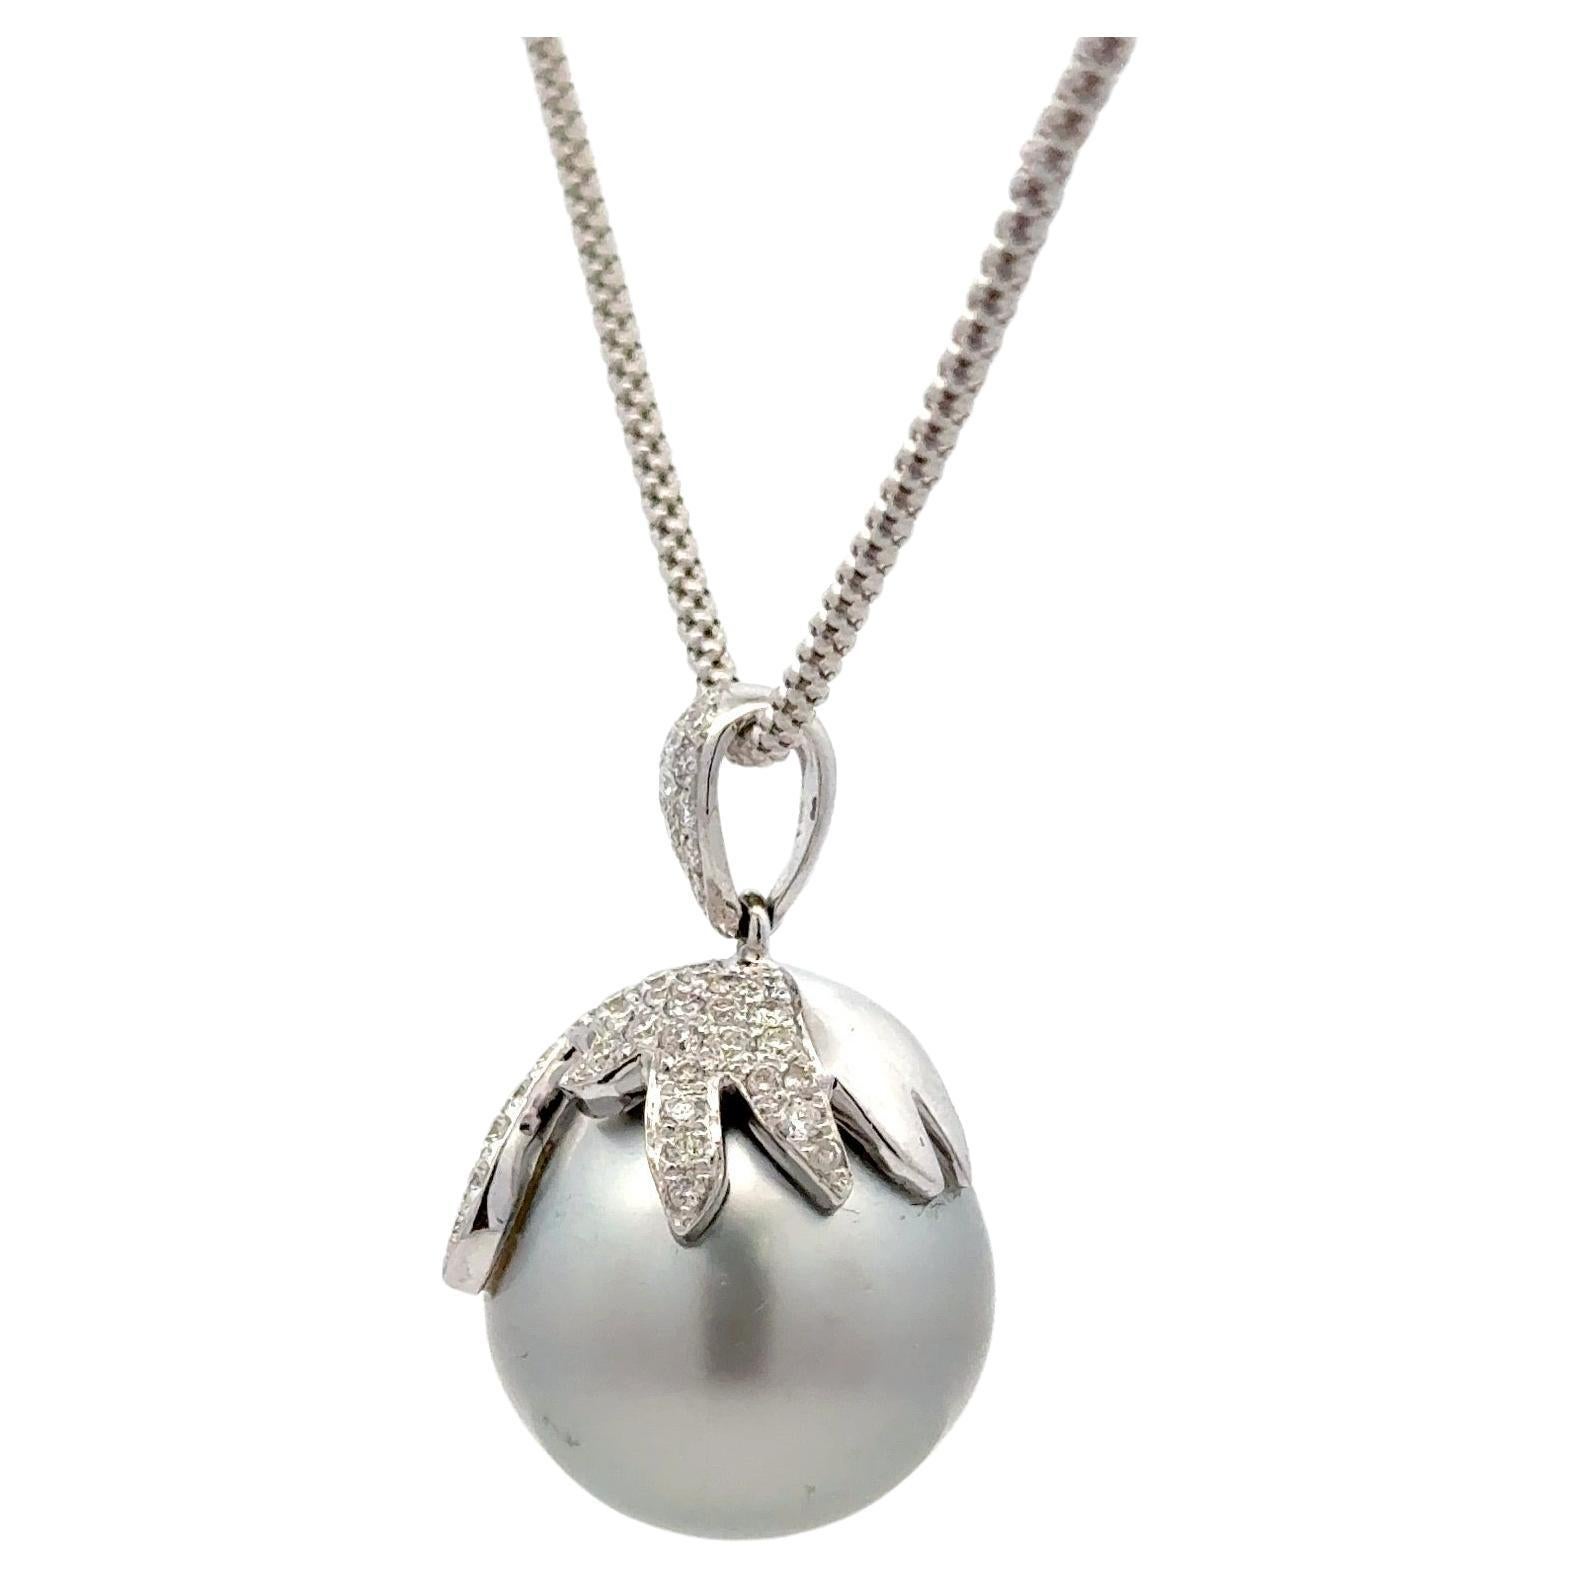 18 Karat white gold pendant featuring one light grey Tahitian Pearl measuring 15 mm with a diamond cap of 86 round brilliants weighing 0.83 carats. 

Diamond Bale 8.4 MM Long
Diamond Cap with Pearl measures 18.9 MM Long
Pedant total 27.3 MM